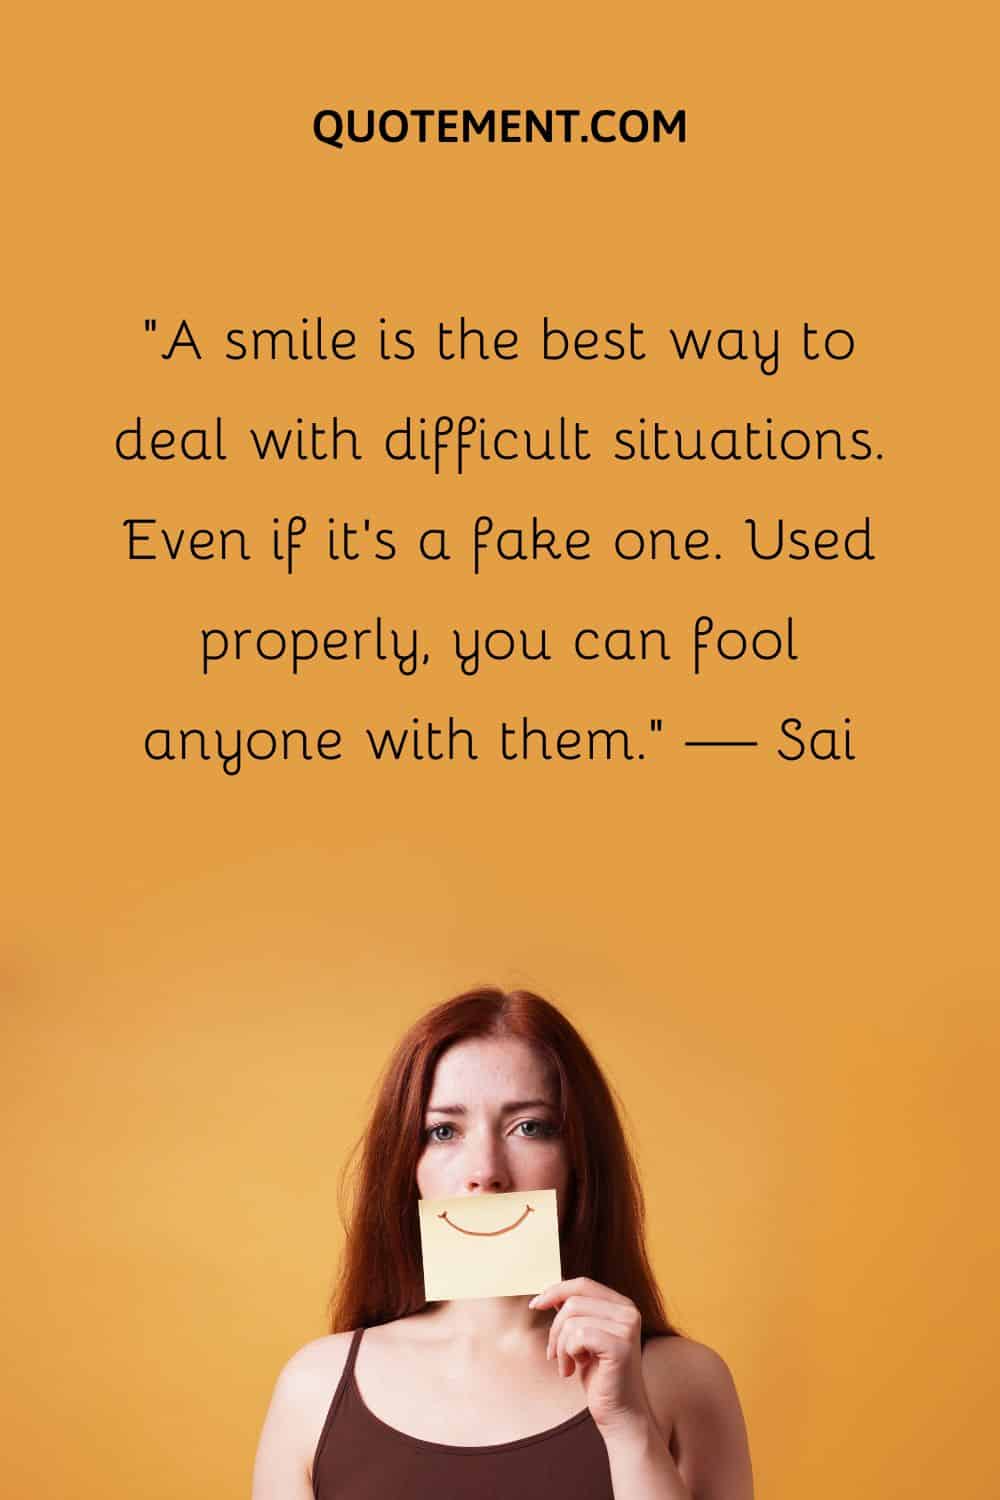 A smile is the best way to deal with difficult situations.